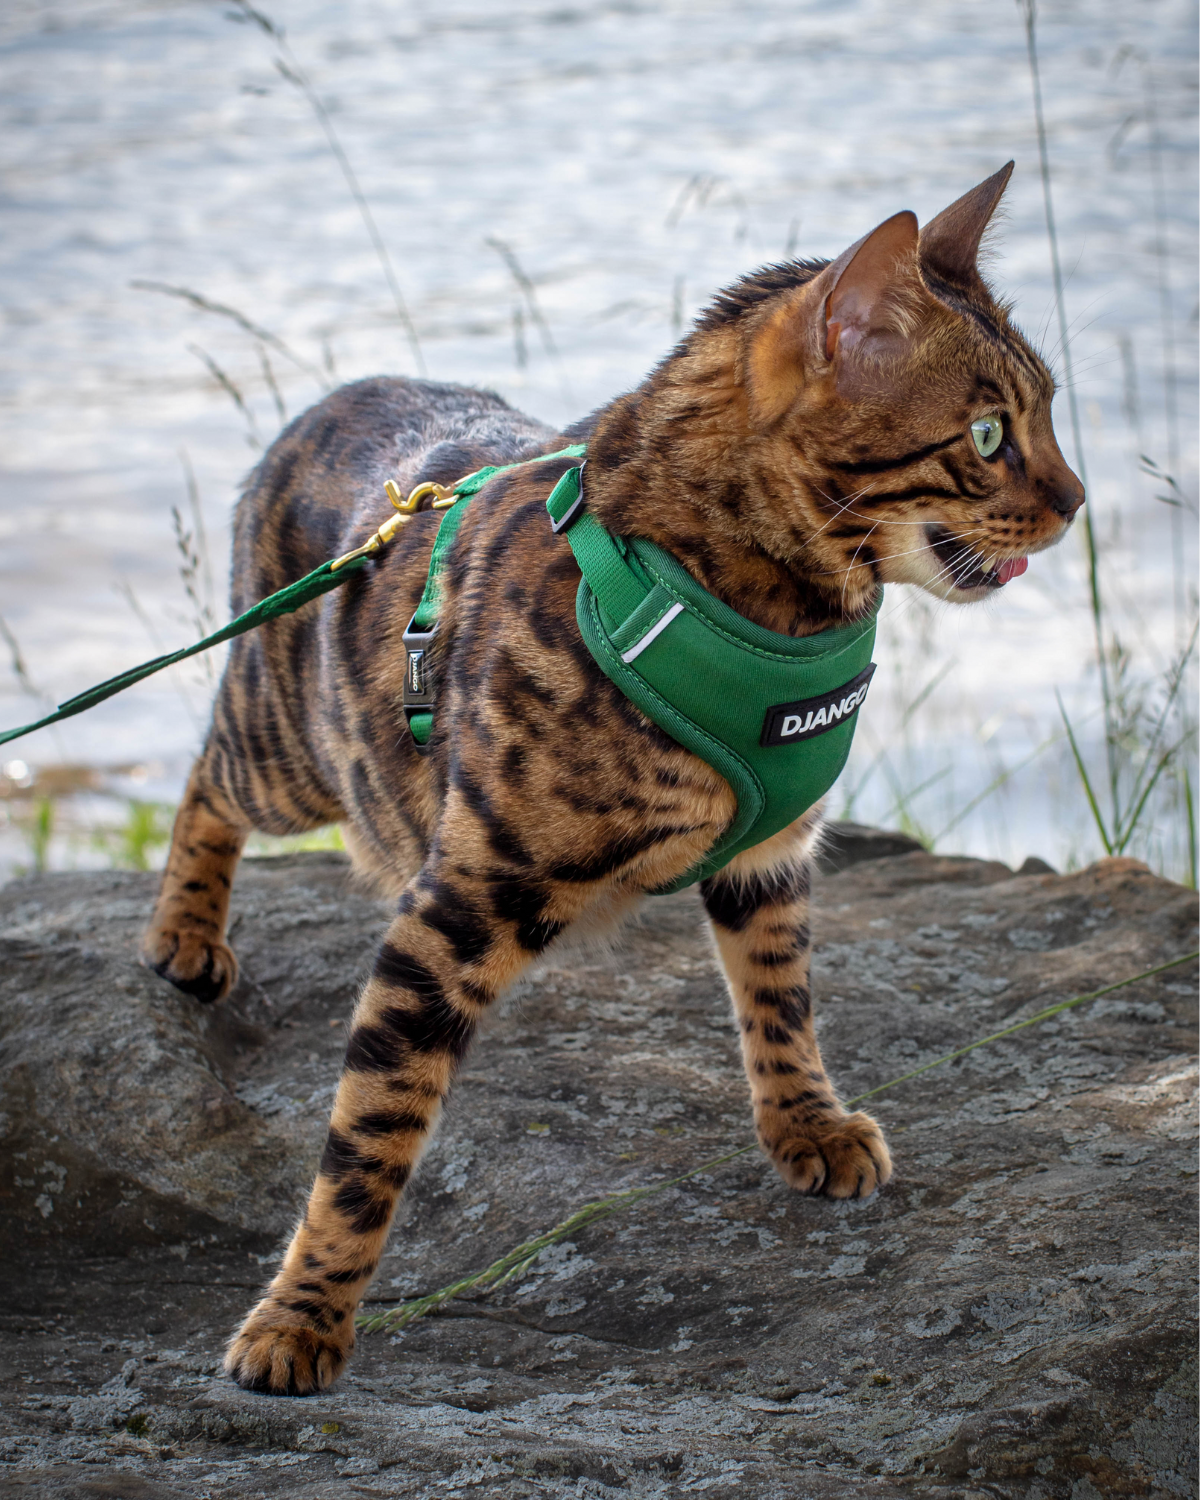 Loki is a Bengal cat and adventure cat and wears size small in DJANGO Adventure Cat Harnesses. Pair your adventure cat harness with DJANGO's matching standard and hands-free cat leashes. - djangobrand.com